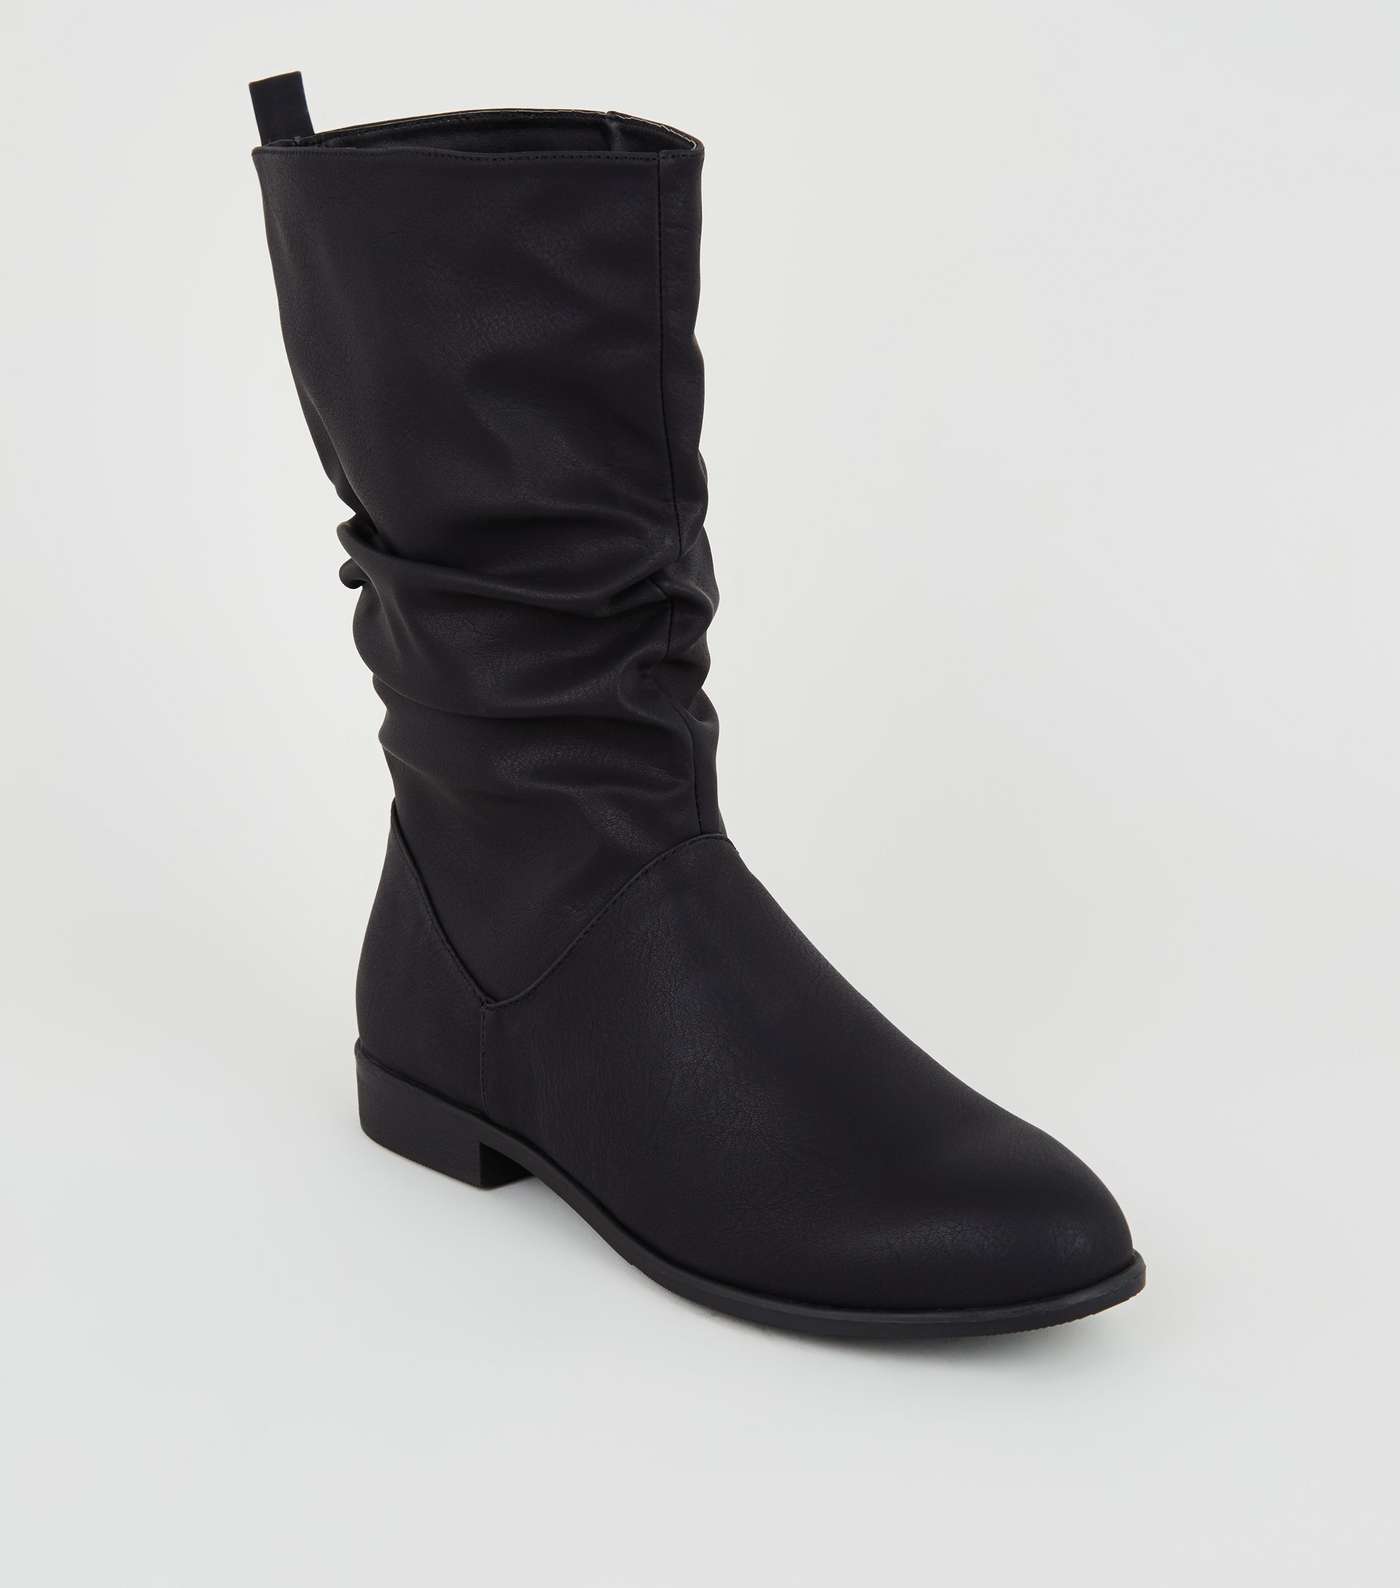 Black Leather-Look Slouch Calf Boots